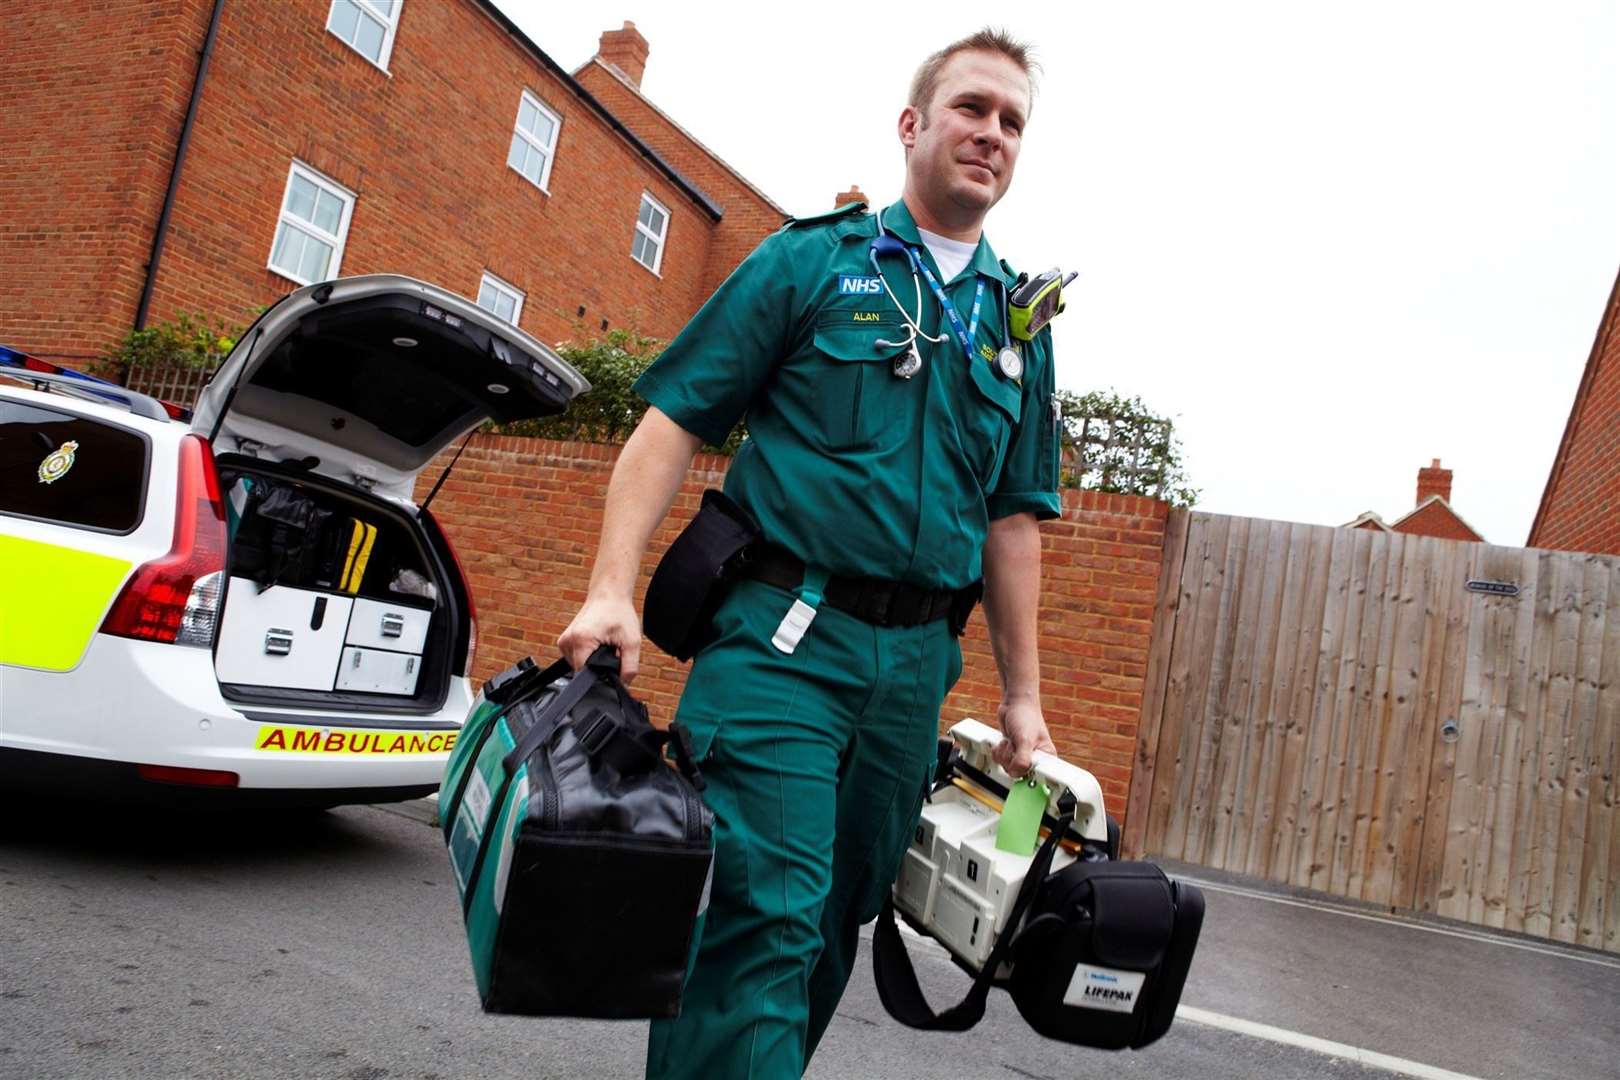 When they arrived, the paramedics were "marvellous". SECAMB stock pic